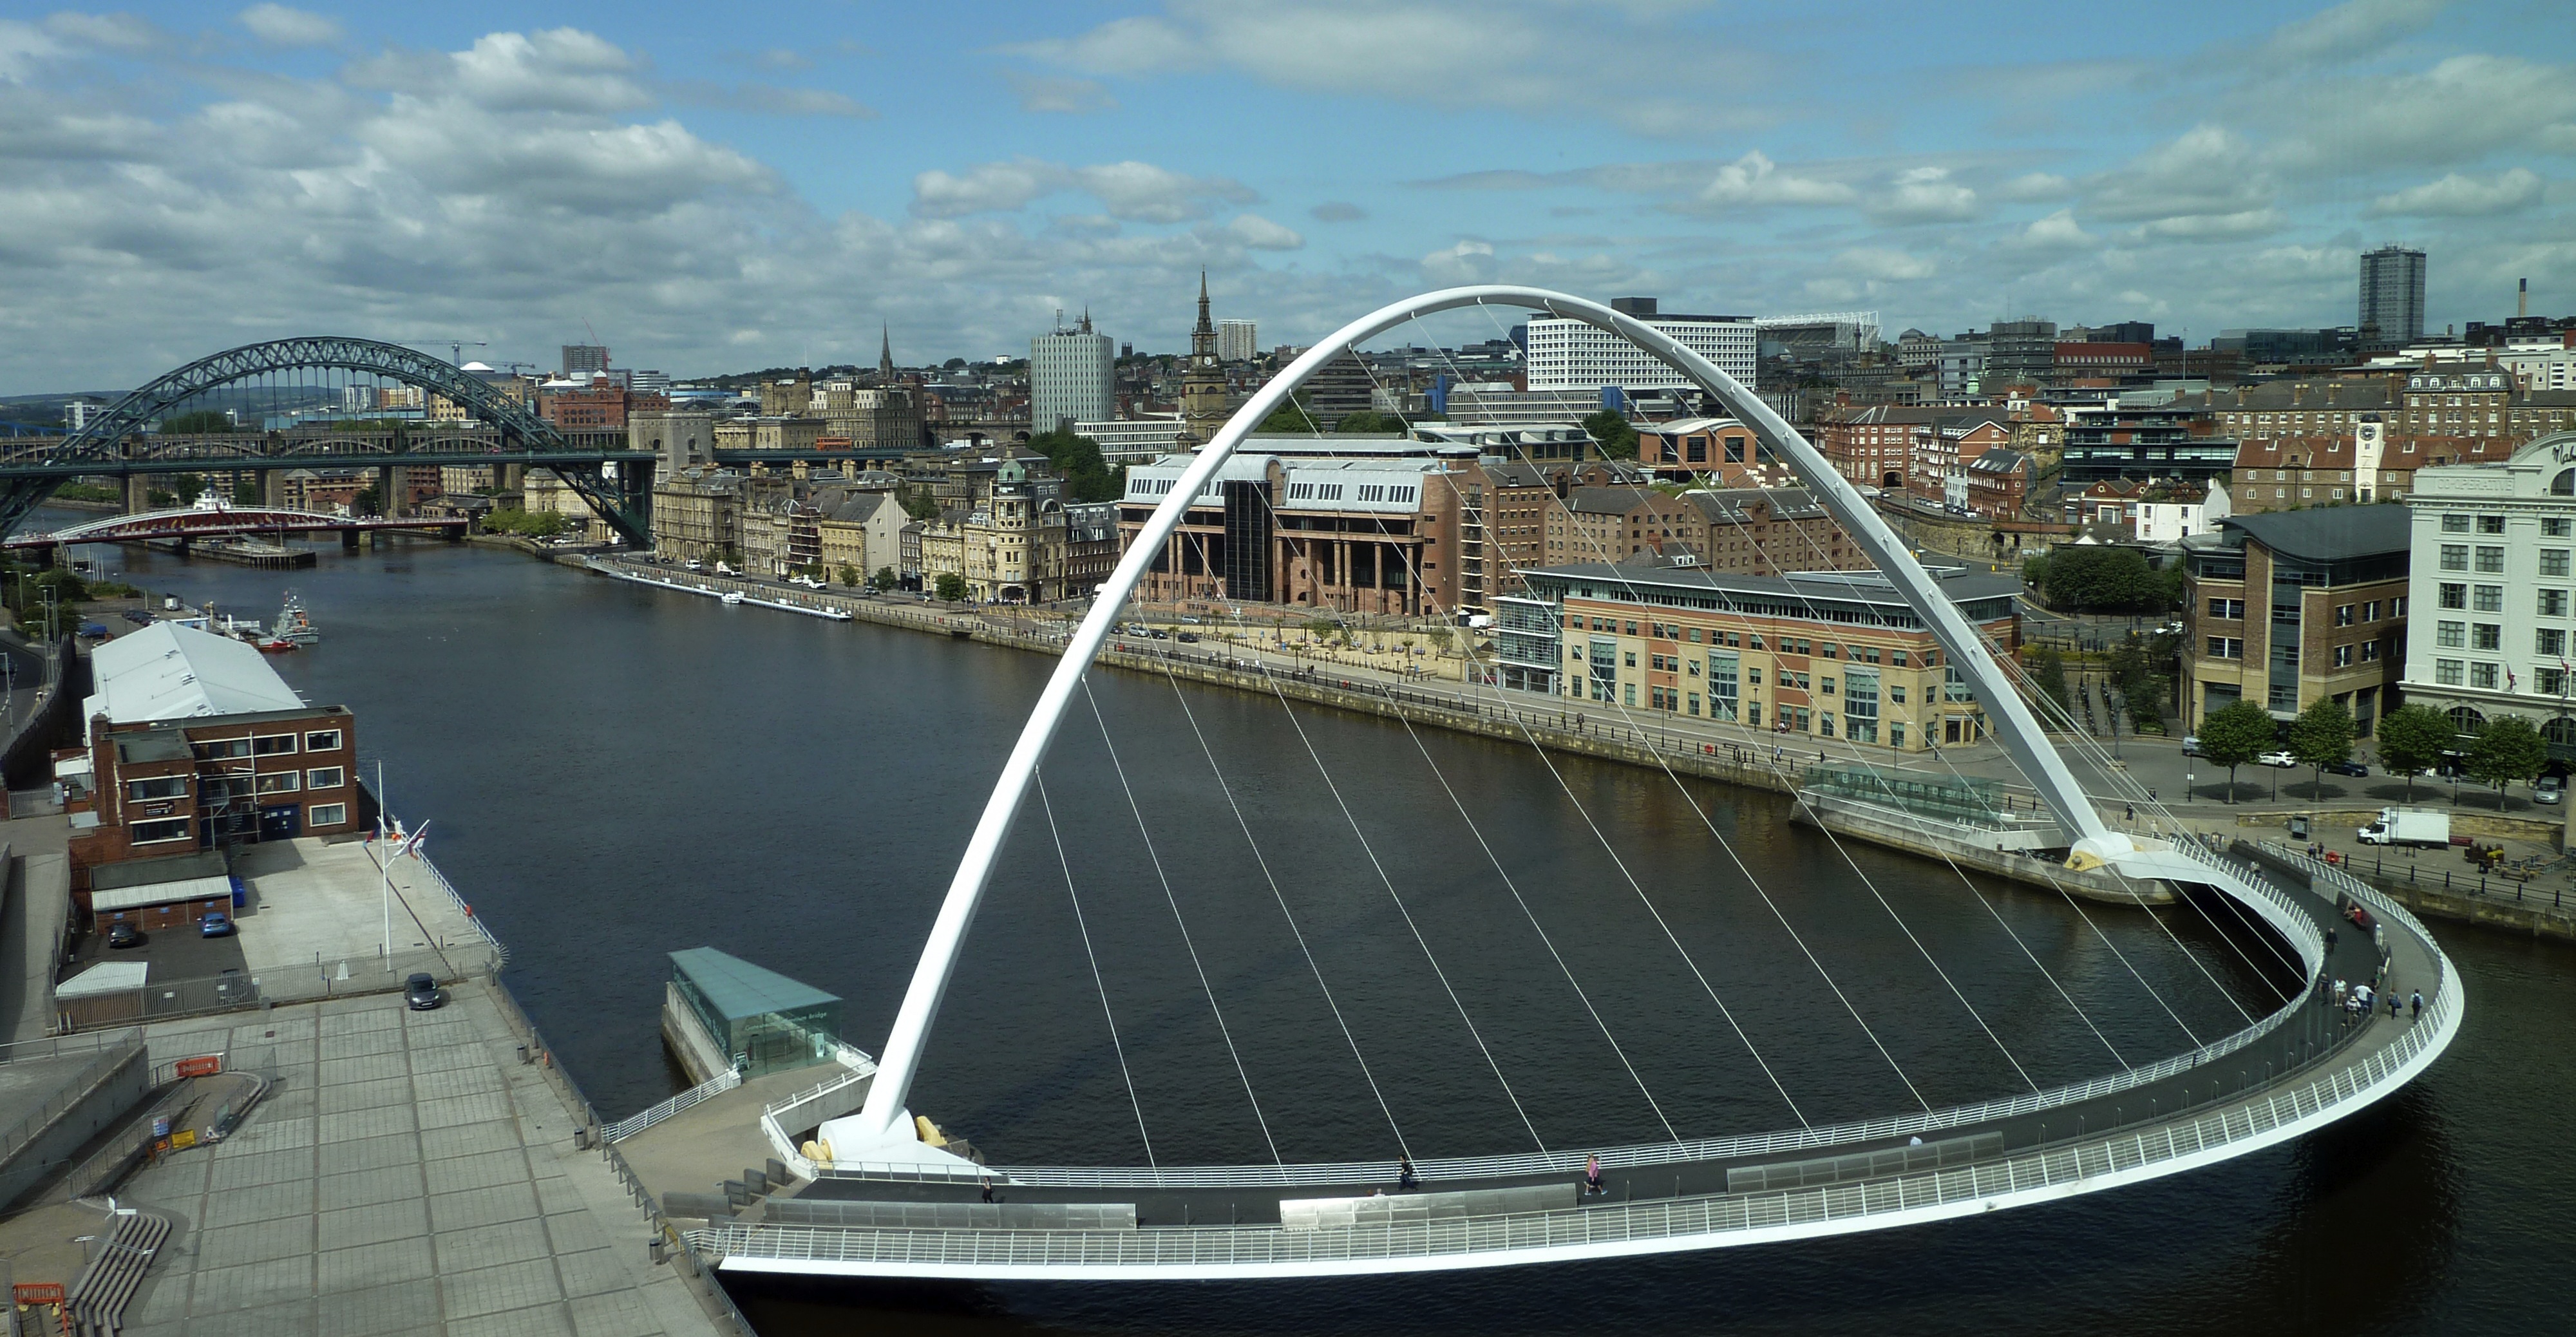 Popular Newcastle Image for Phone